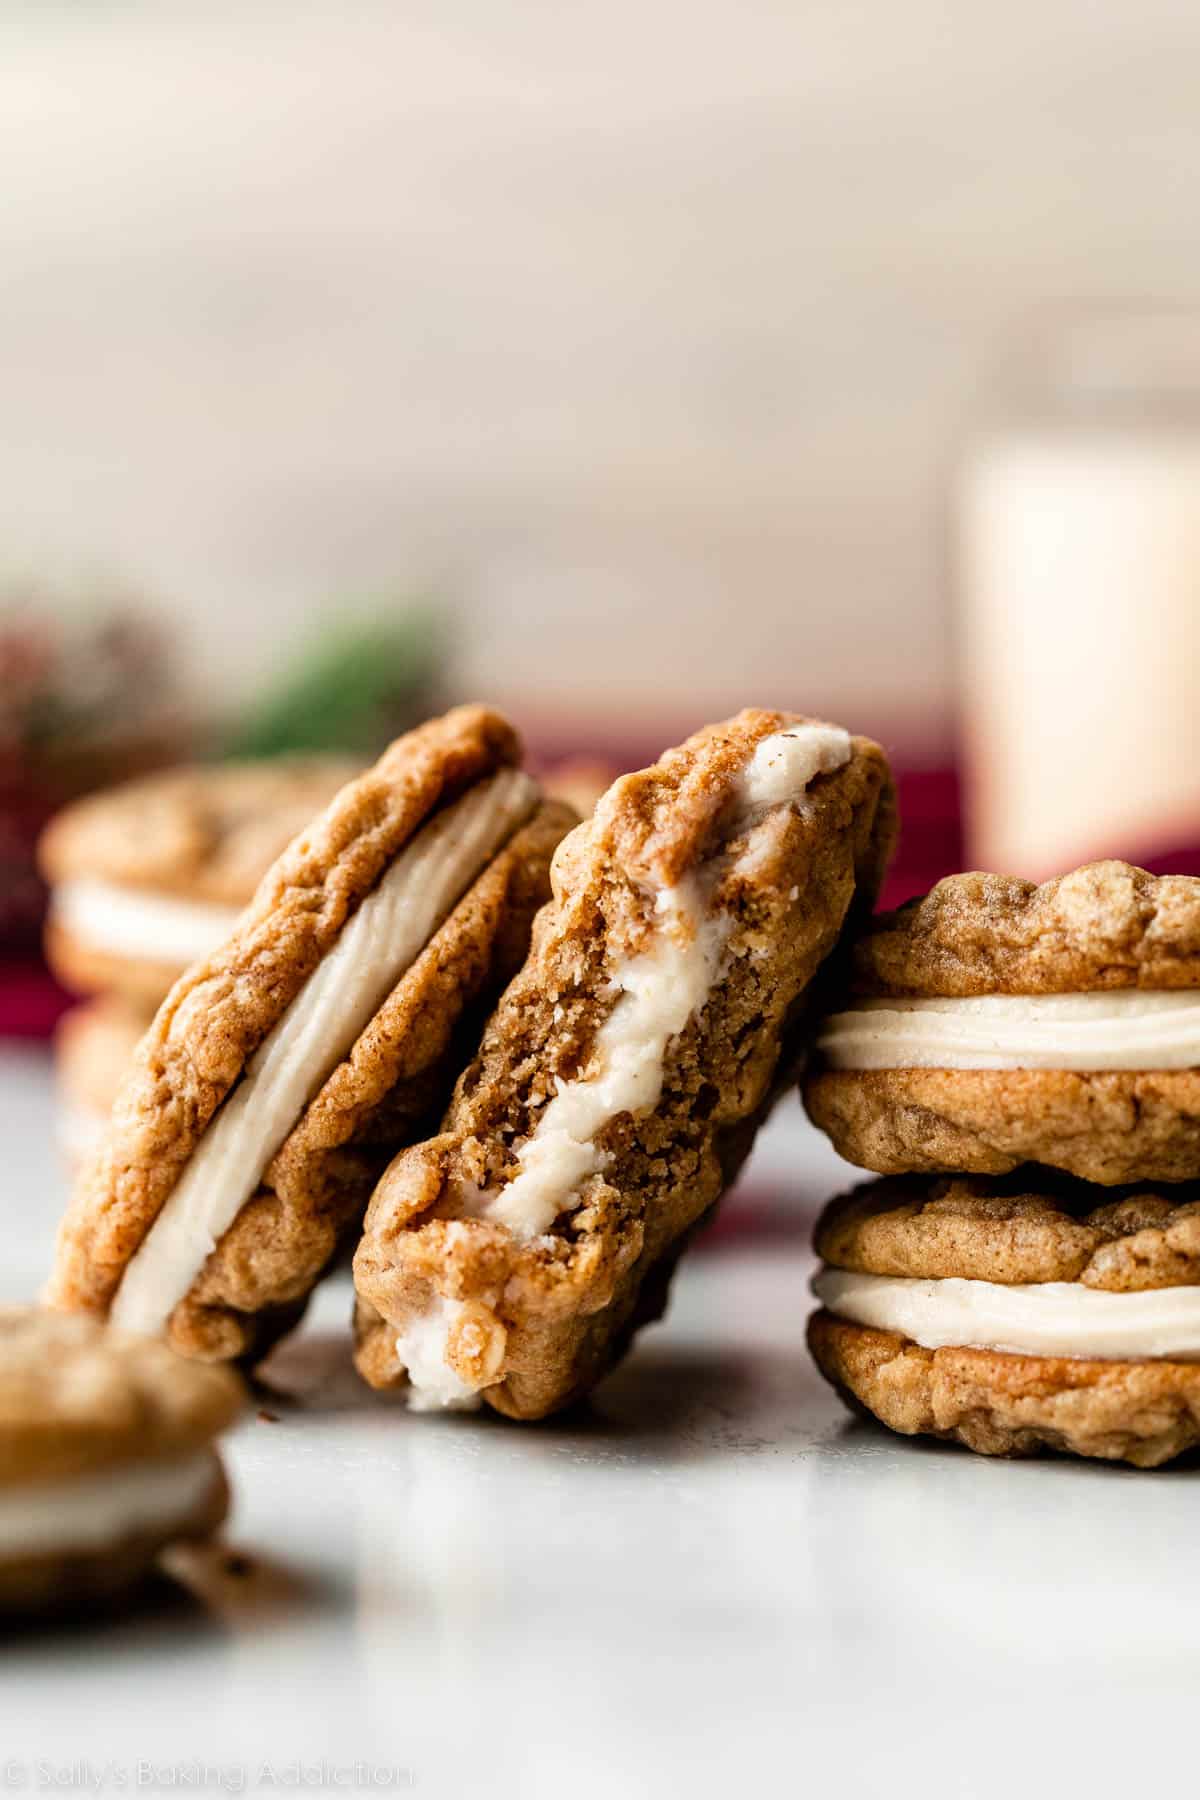 eggnog oatmeal cream pies with one bite taken out of one of the cookie sandwiches.